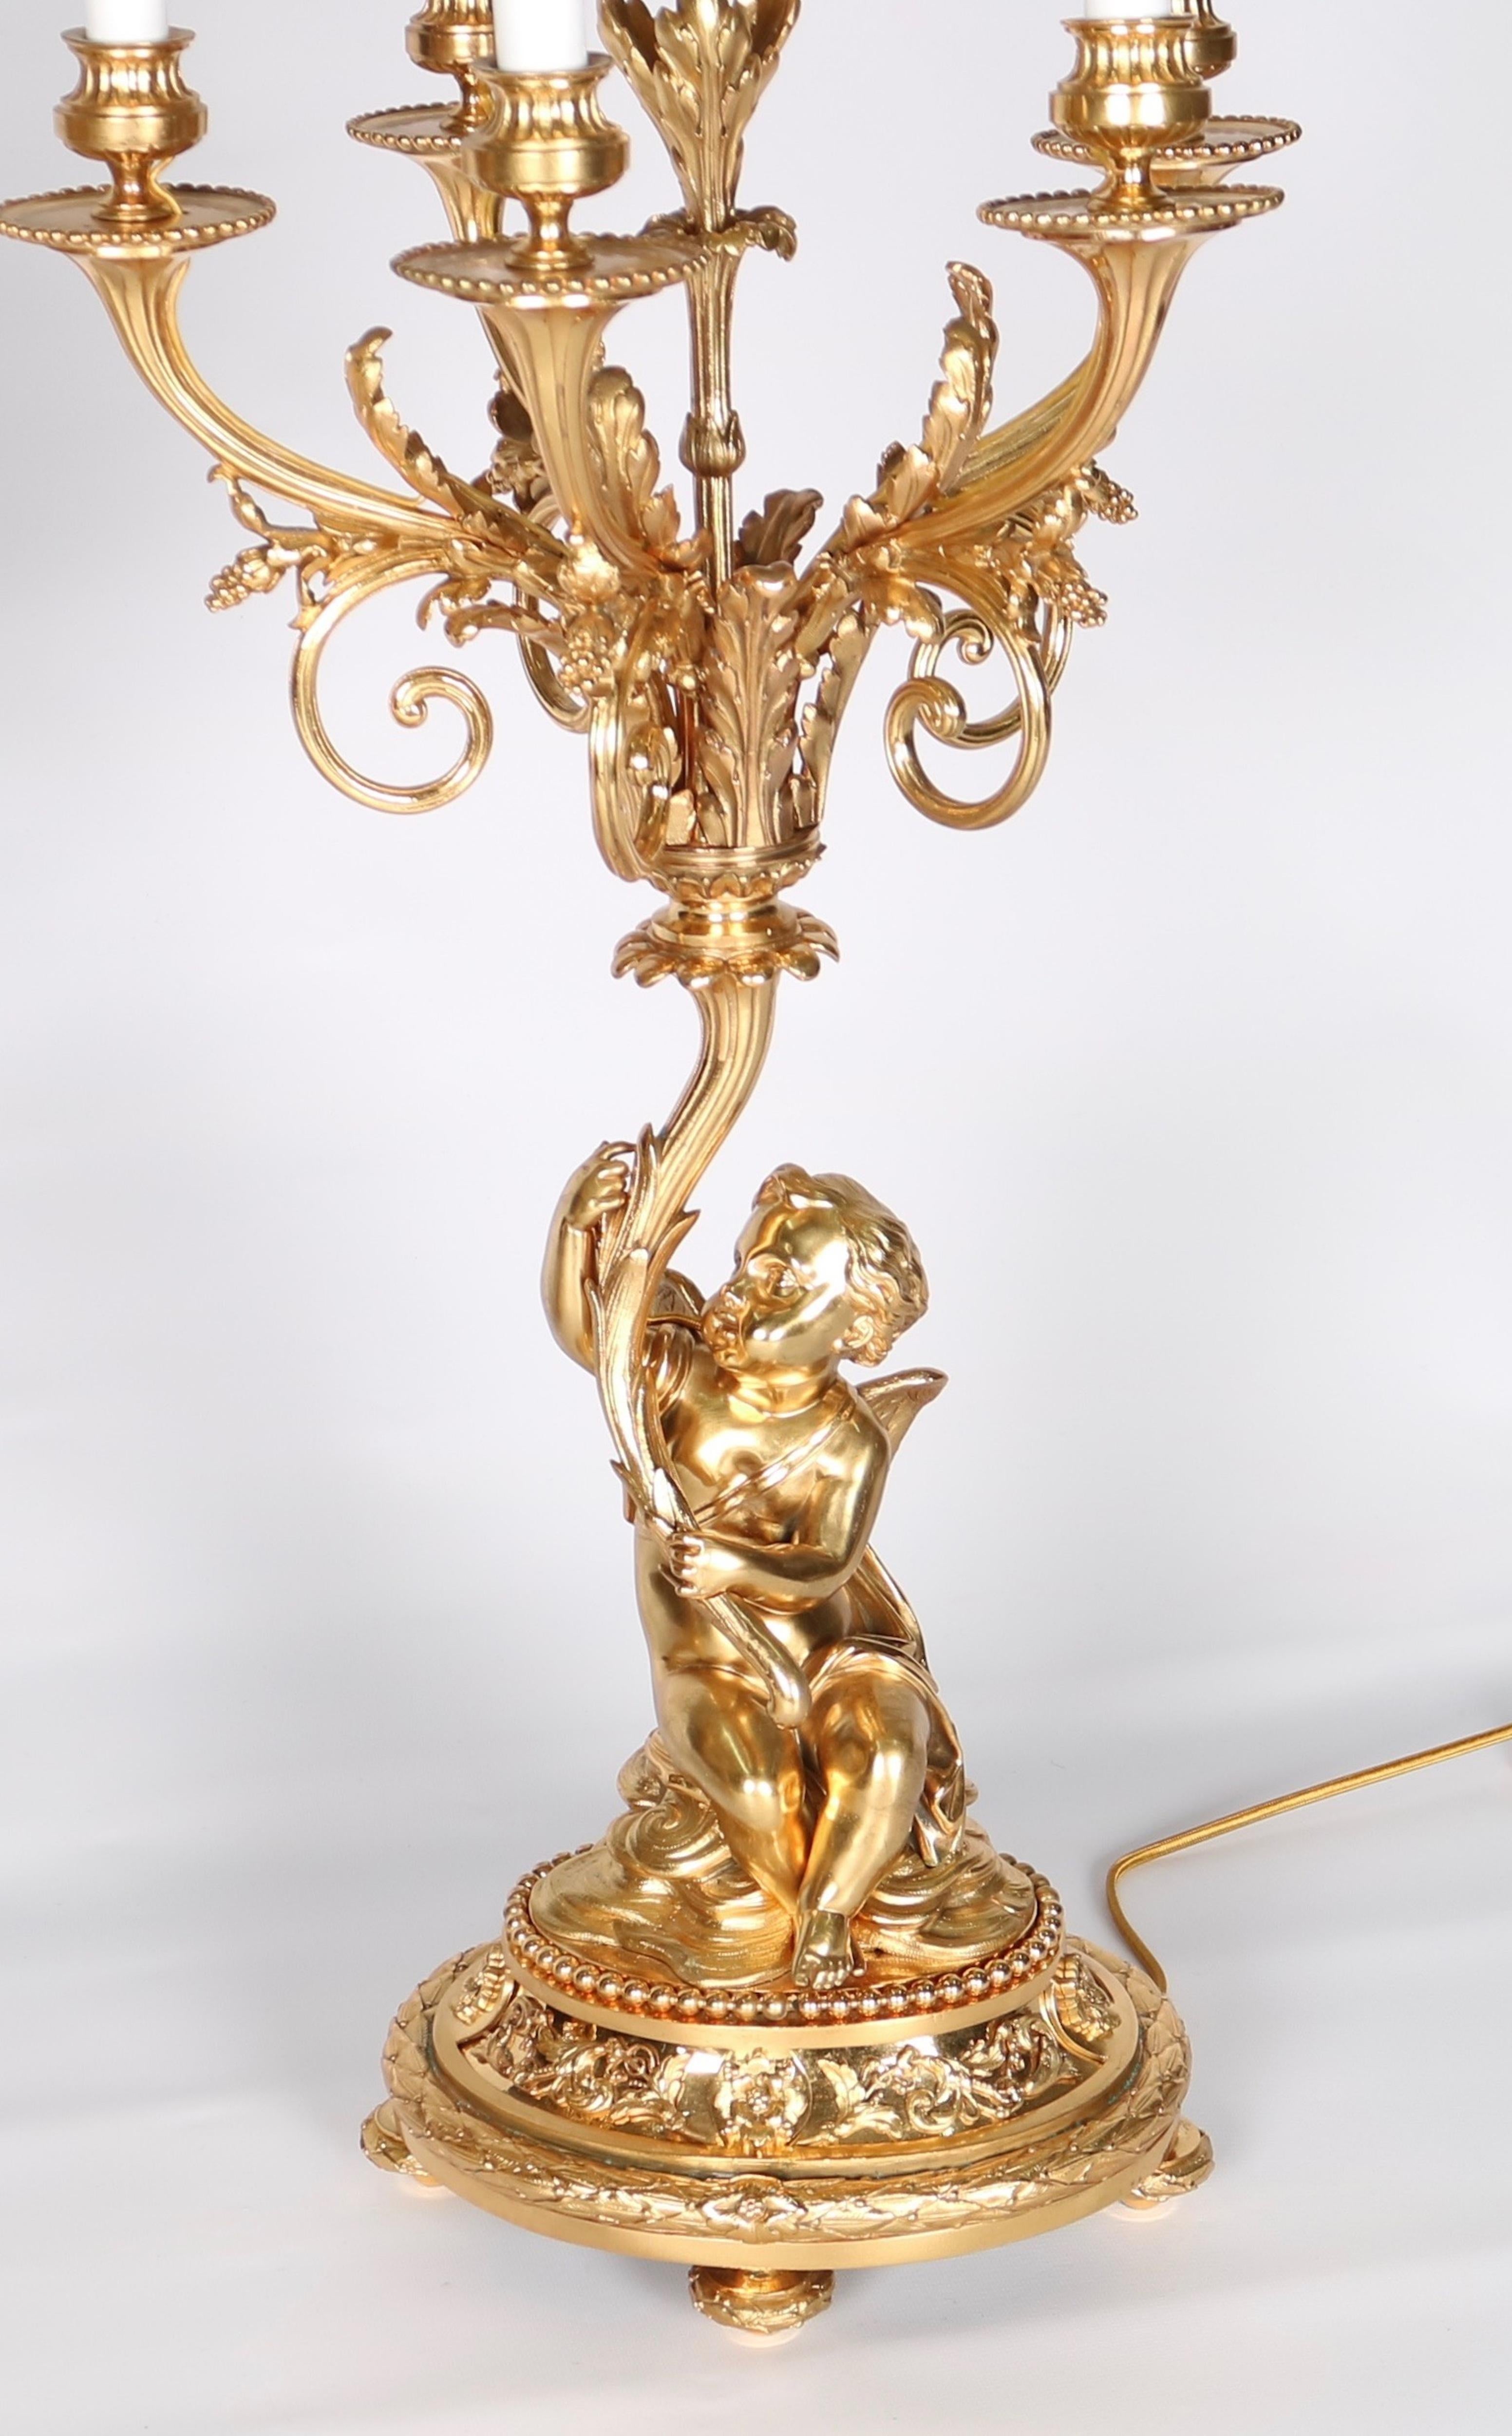 French candelabra lamps in gilt bronze with putti. Each lamp stands on an oval base with a seated putti holding an arrangement of curved acanthus leaves ending in six arms. Crafted in the 18th century, the pair have been newly rewired. Despite wear